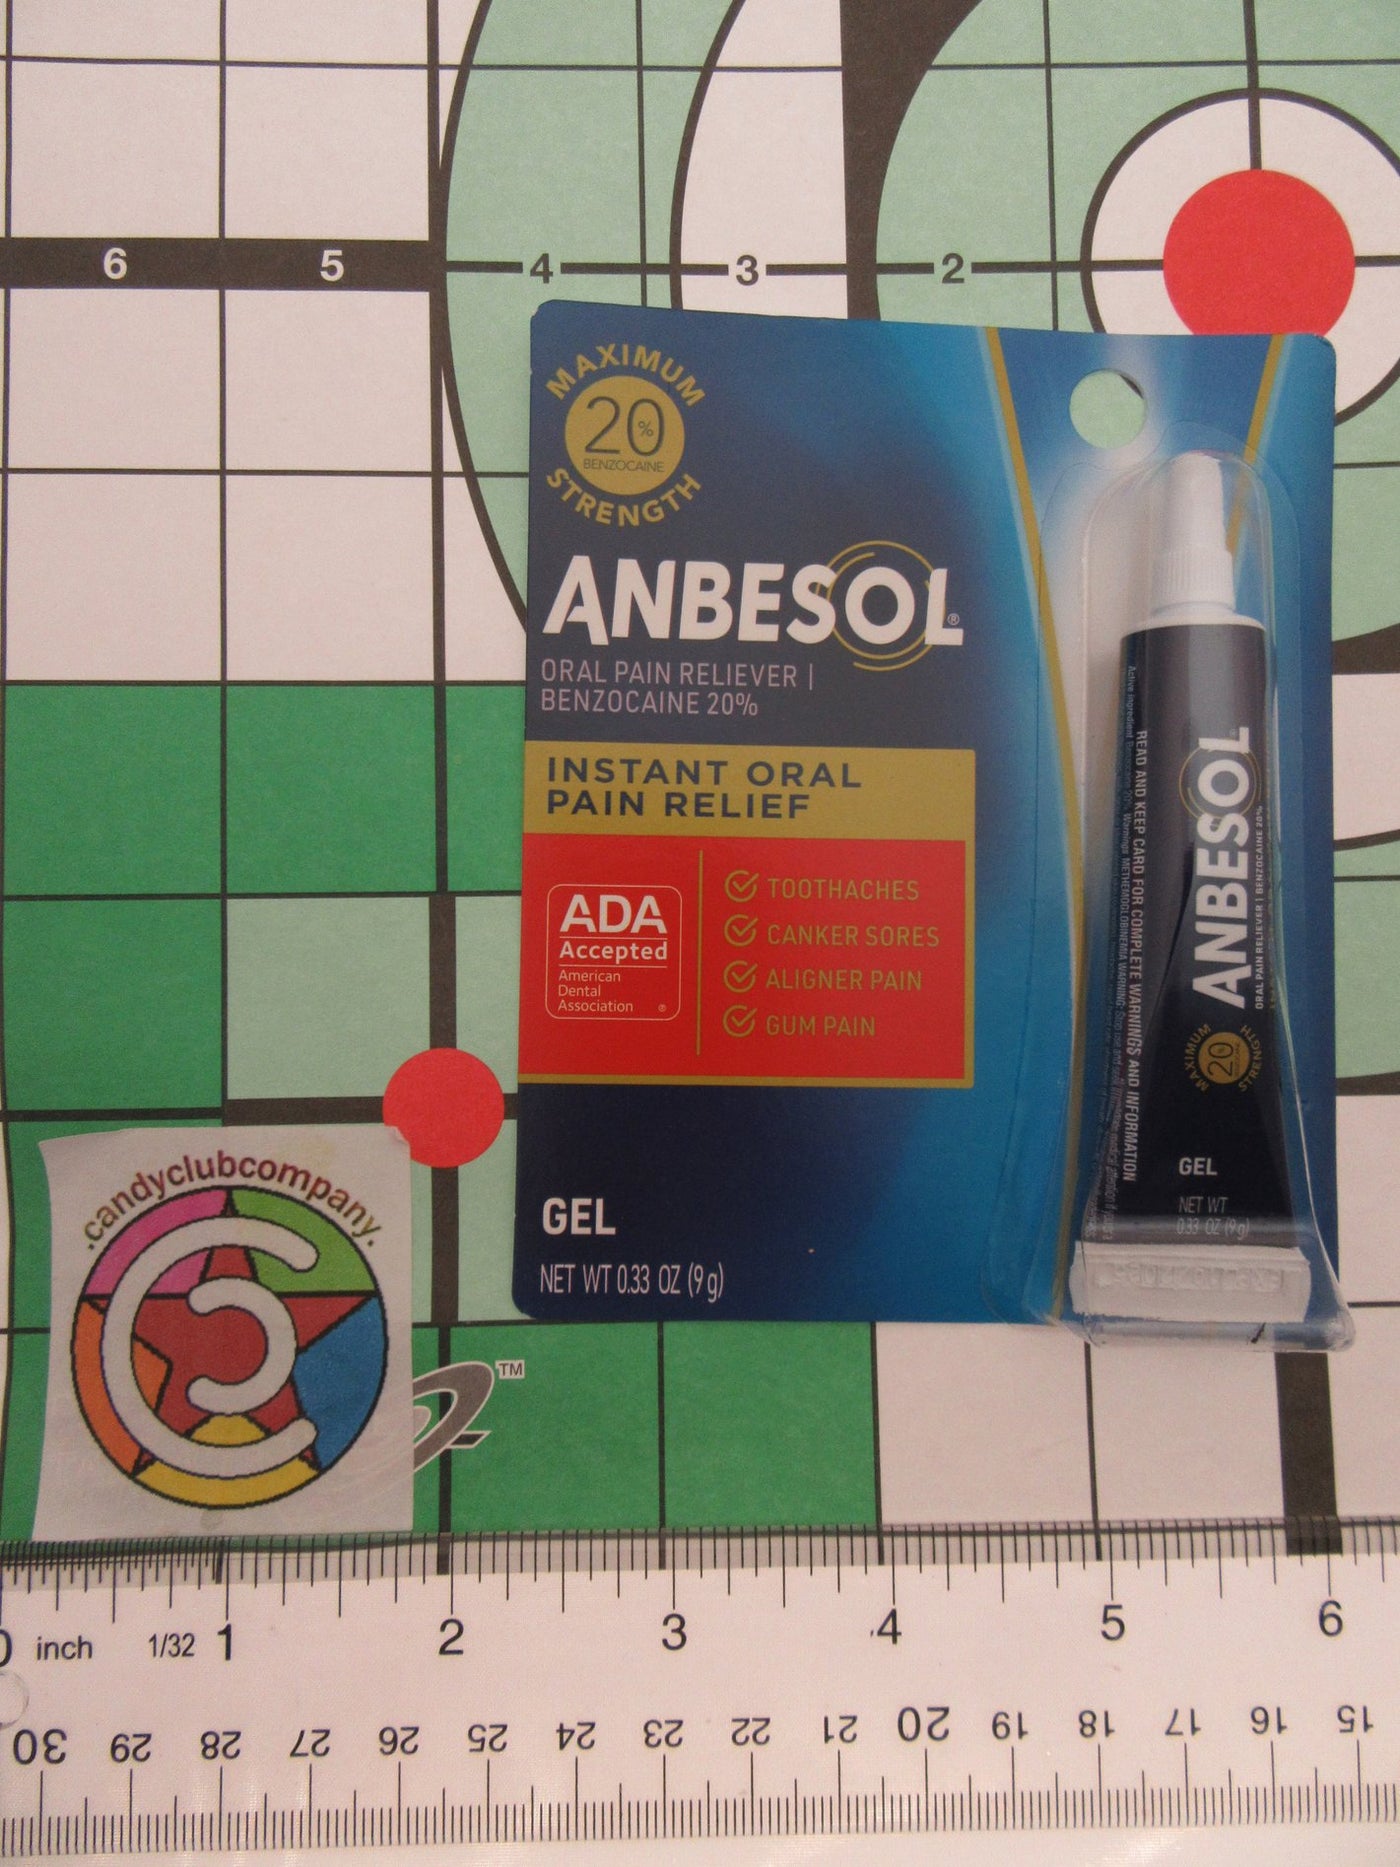 Anbesol Maximum Oral Anesthetic 20% Benzocaine Instant Toothache Pain Relief .33